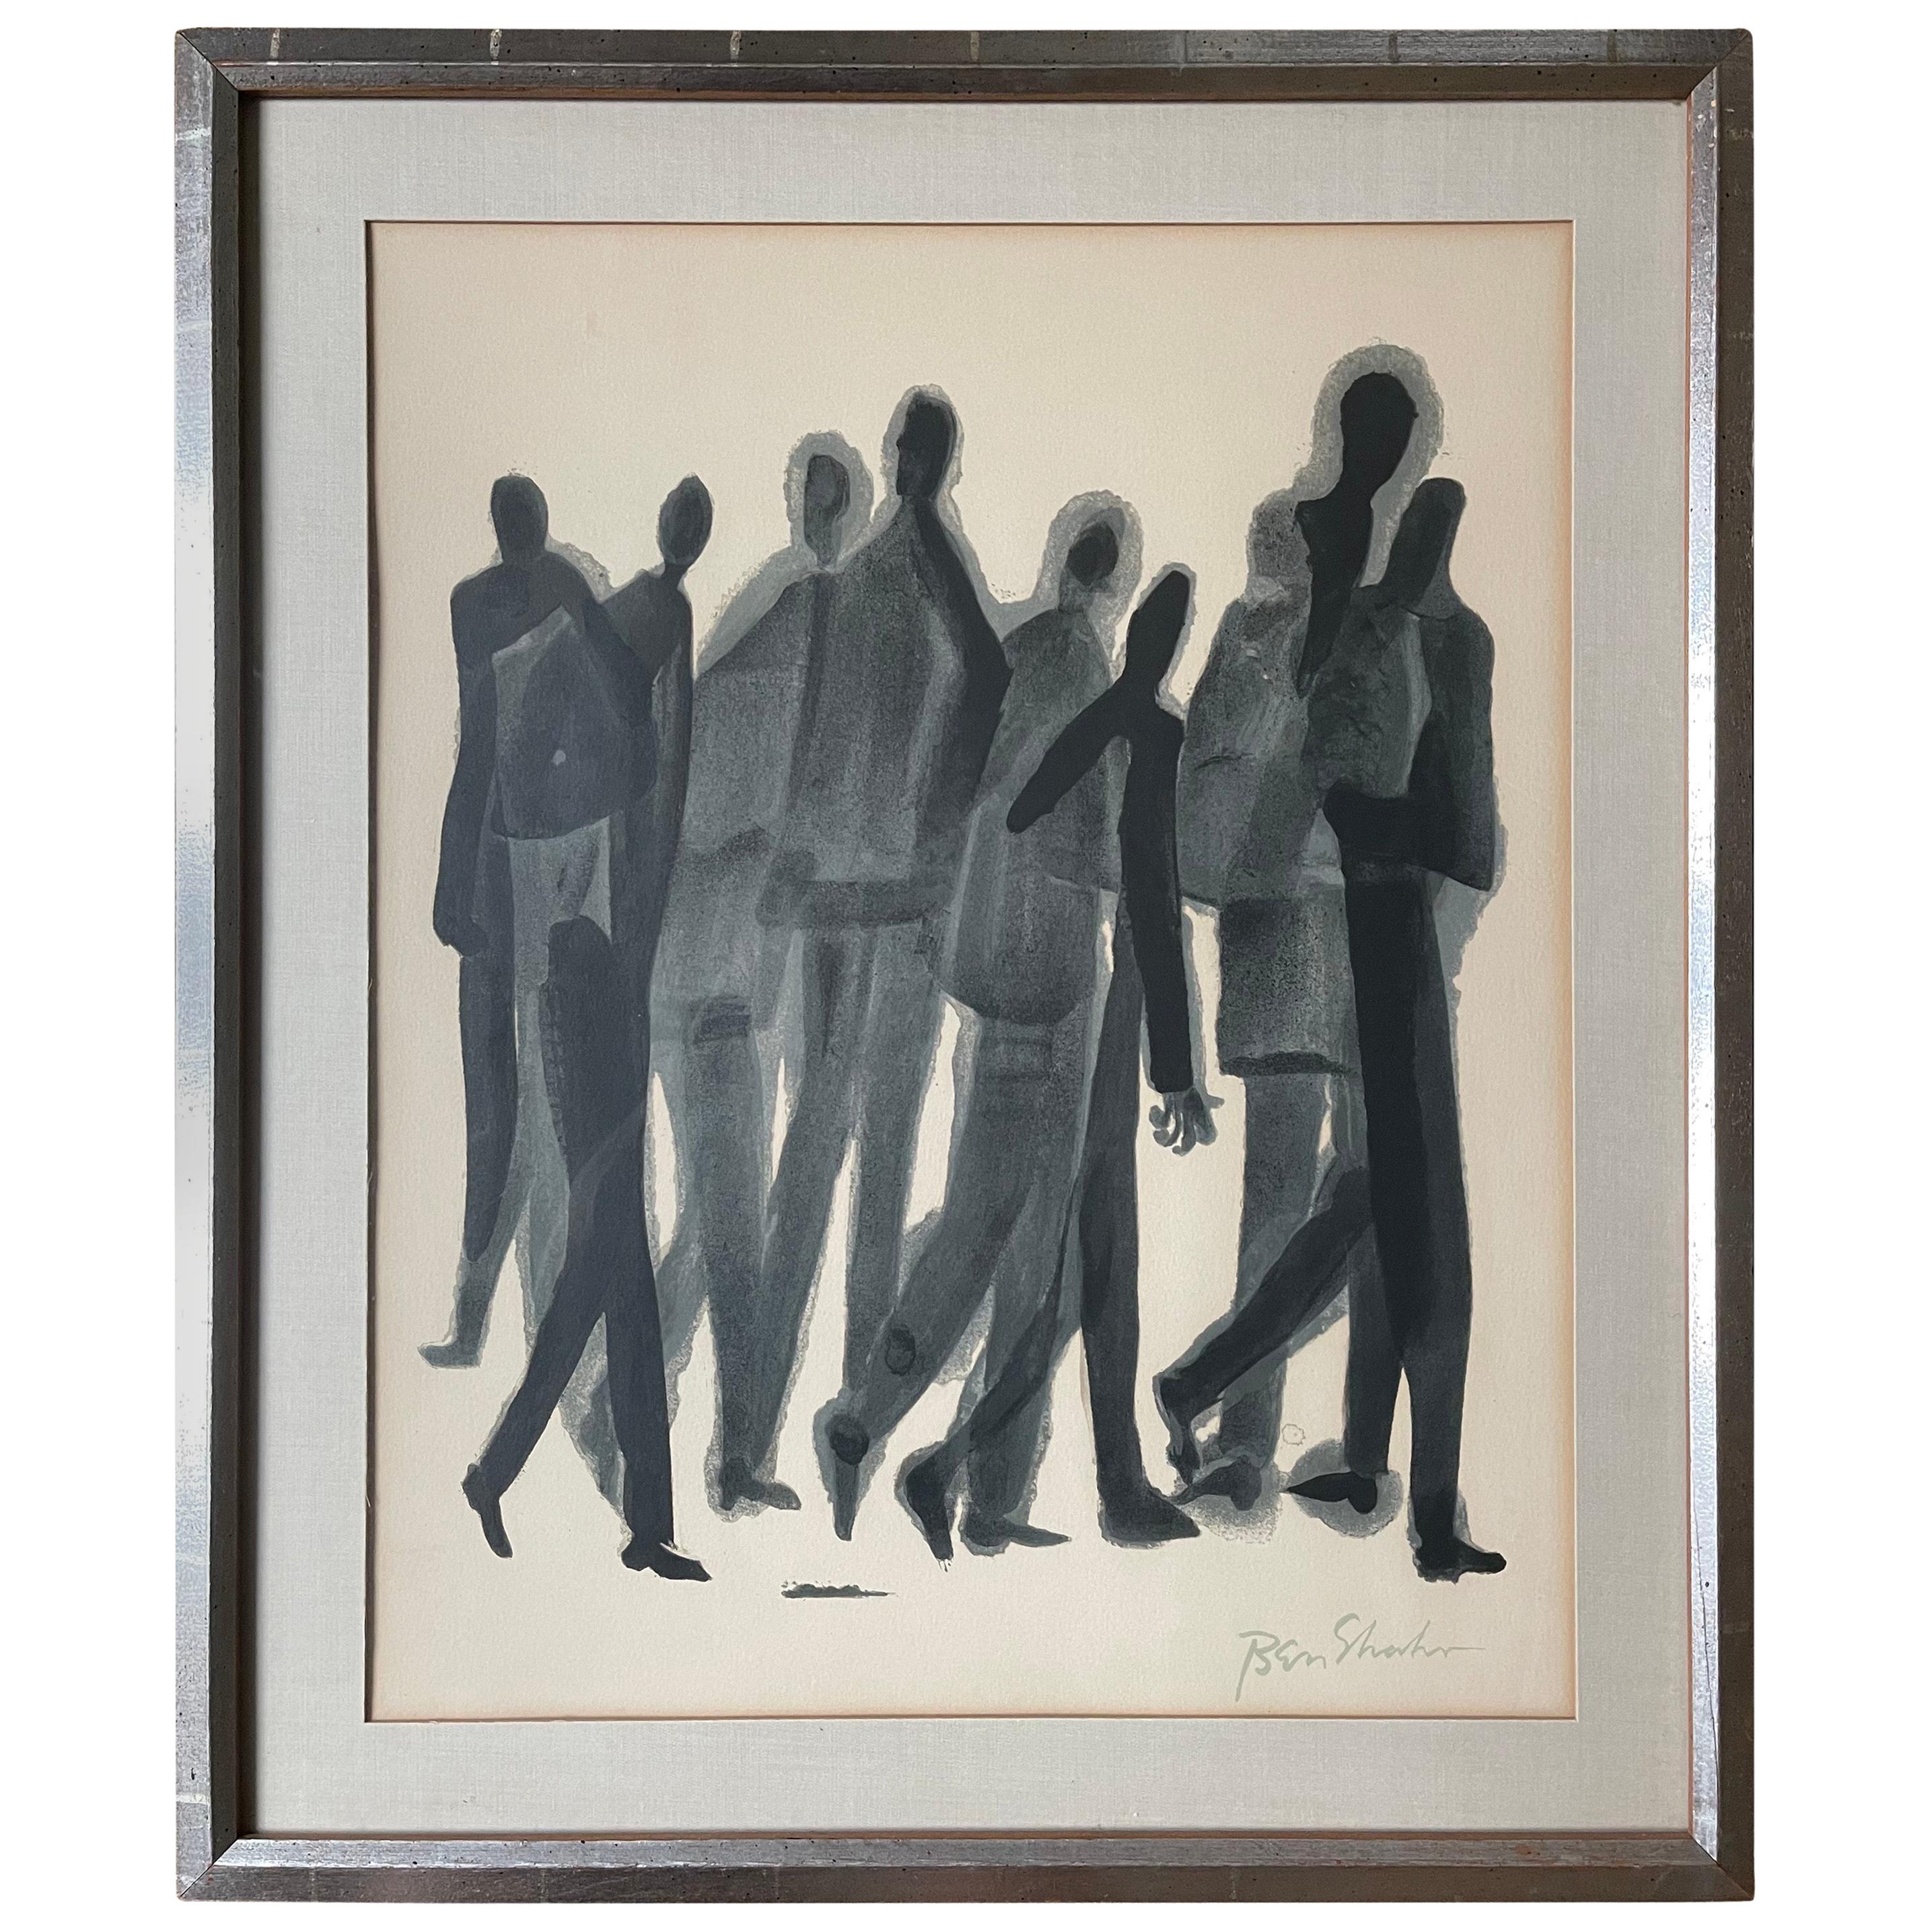 "Many Men" Stone Lithograph by Ben Shahn